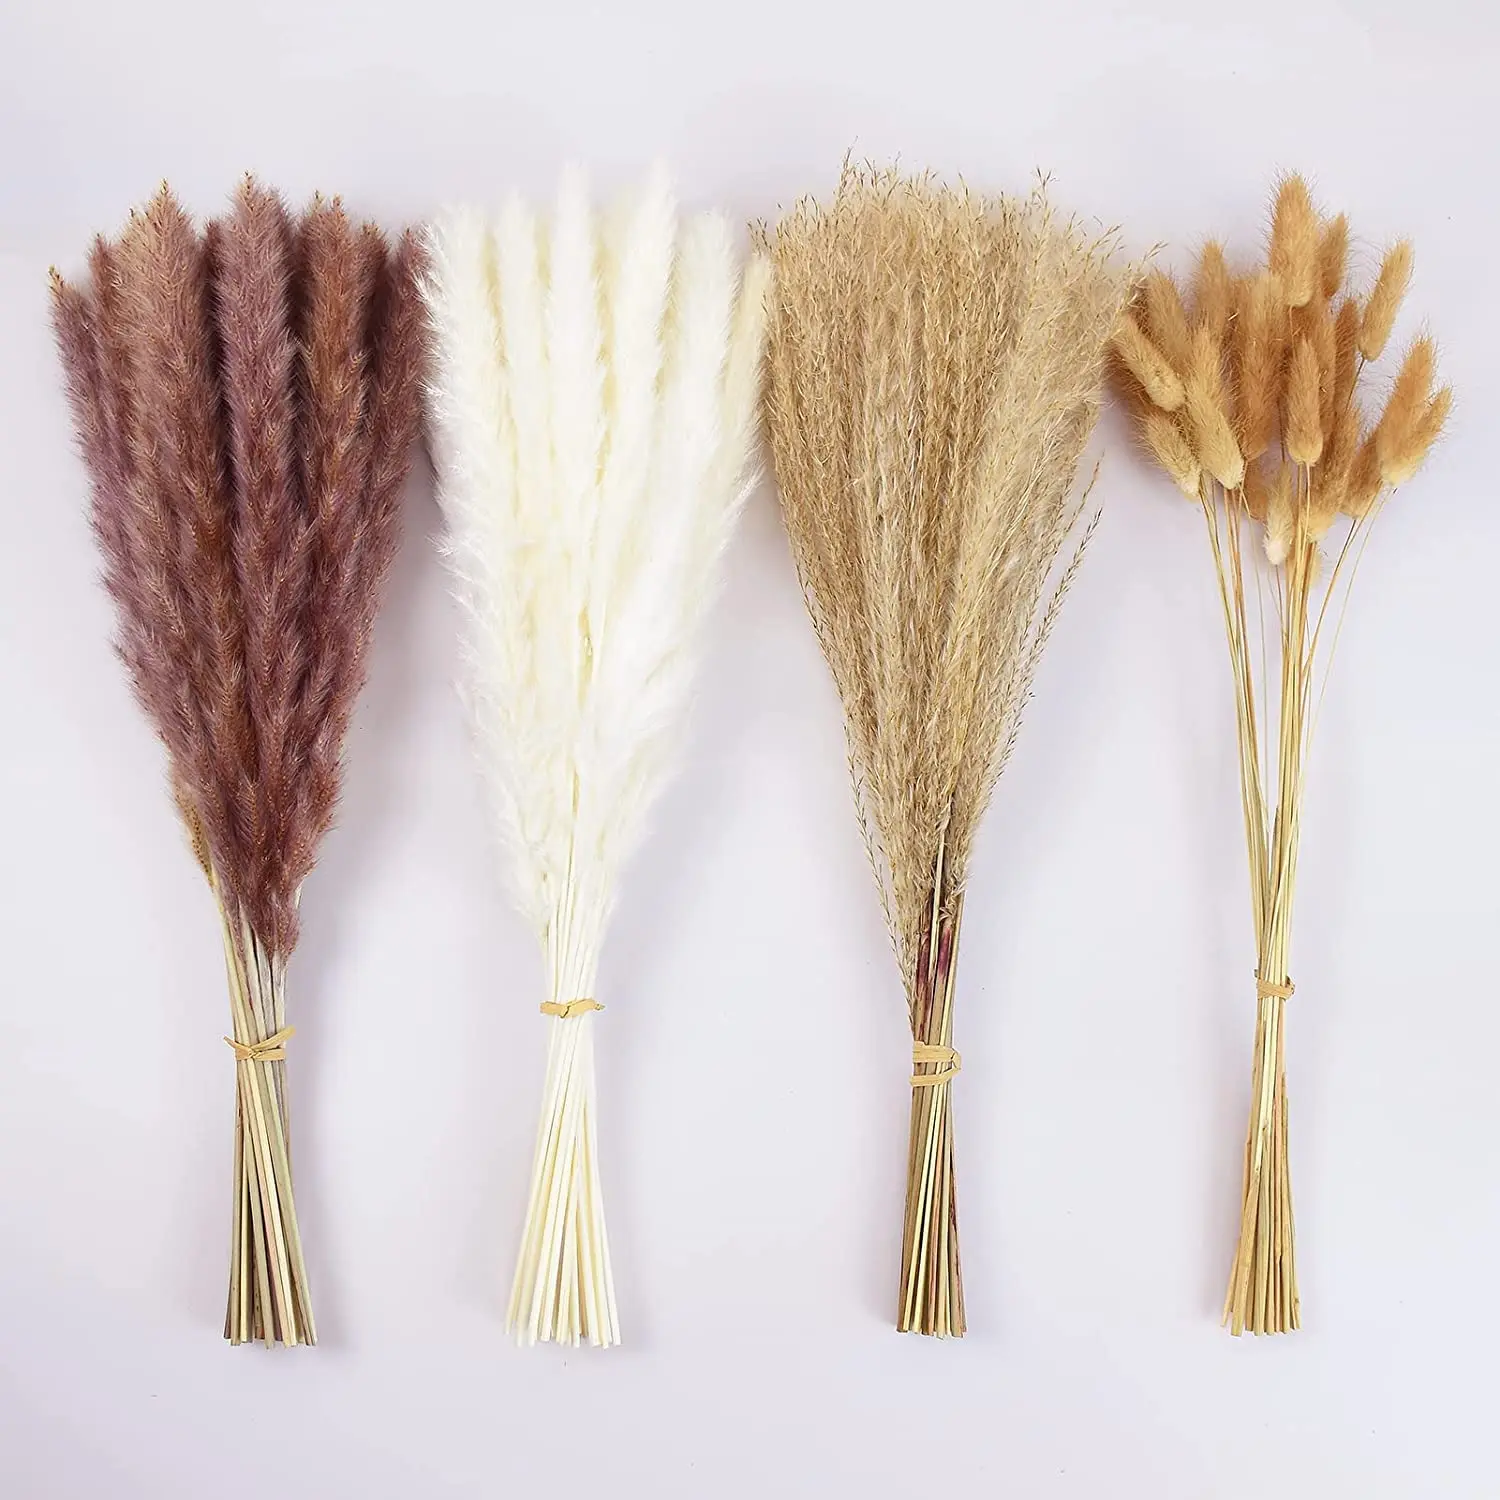 

90Pcs Pampas Grass for Boho Chic Home Decor and Naturally Dried Flower Bouquet Bunny Tails and Reed Grass Phragmites Dekoration